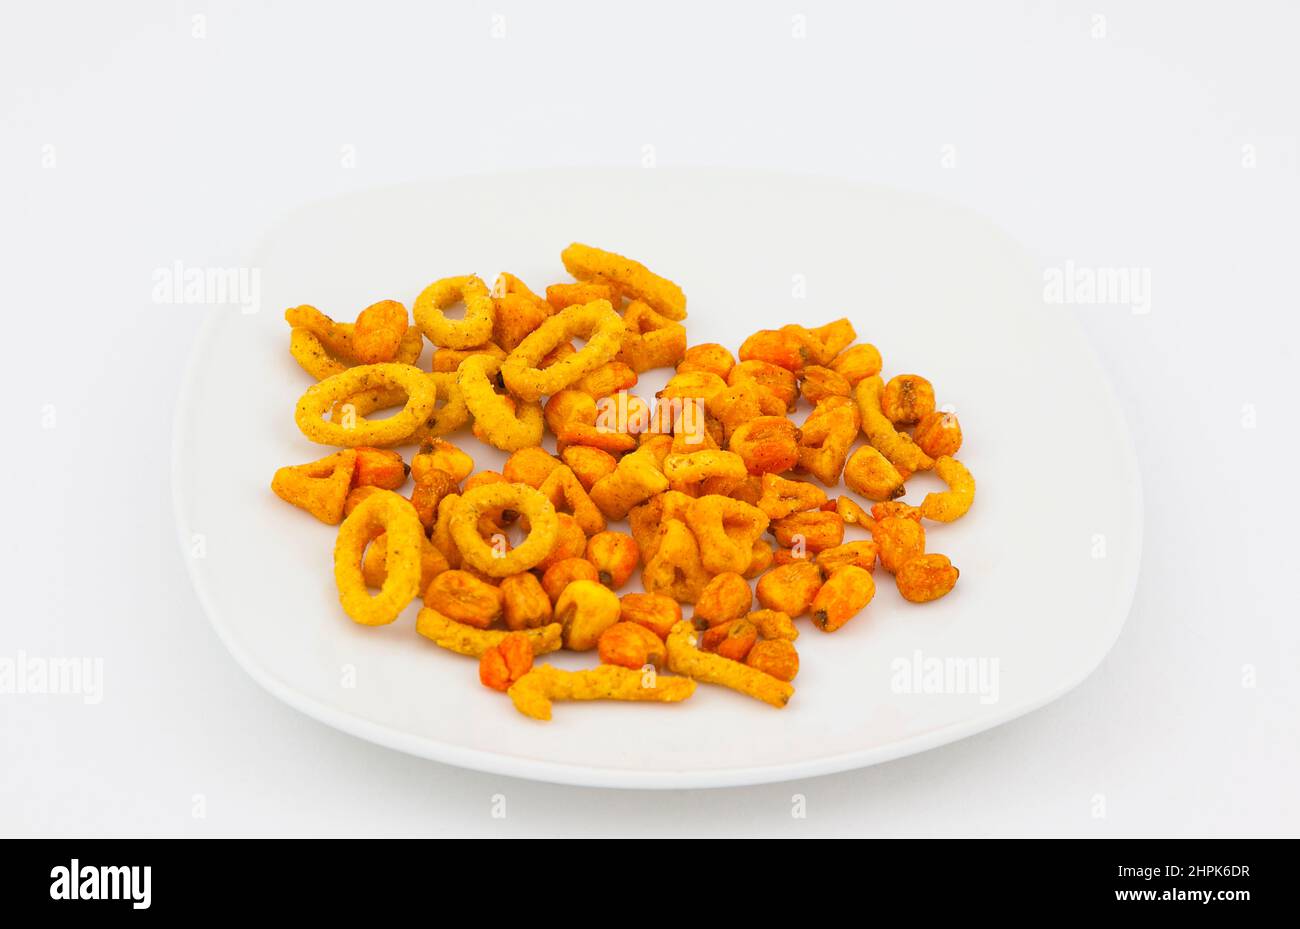 Food, Snacks, Spicy flavoured baked corn shapes. Stock Photo